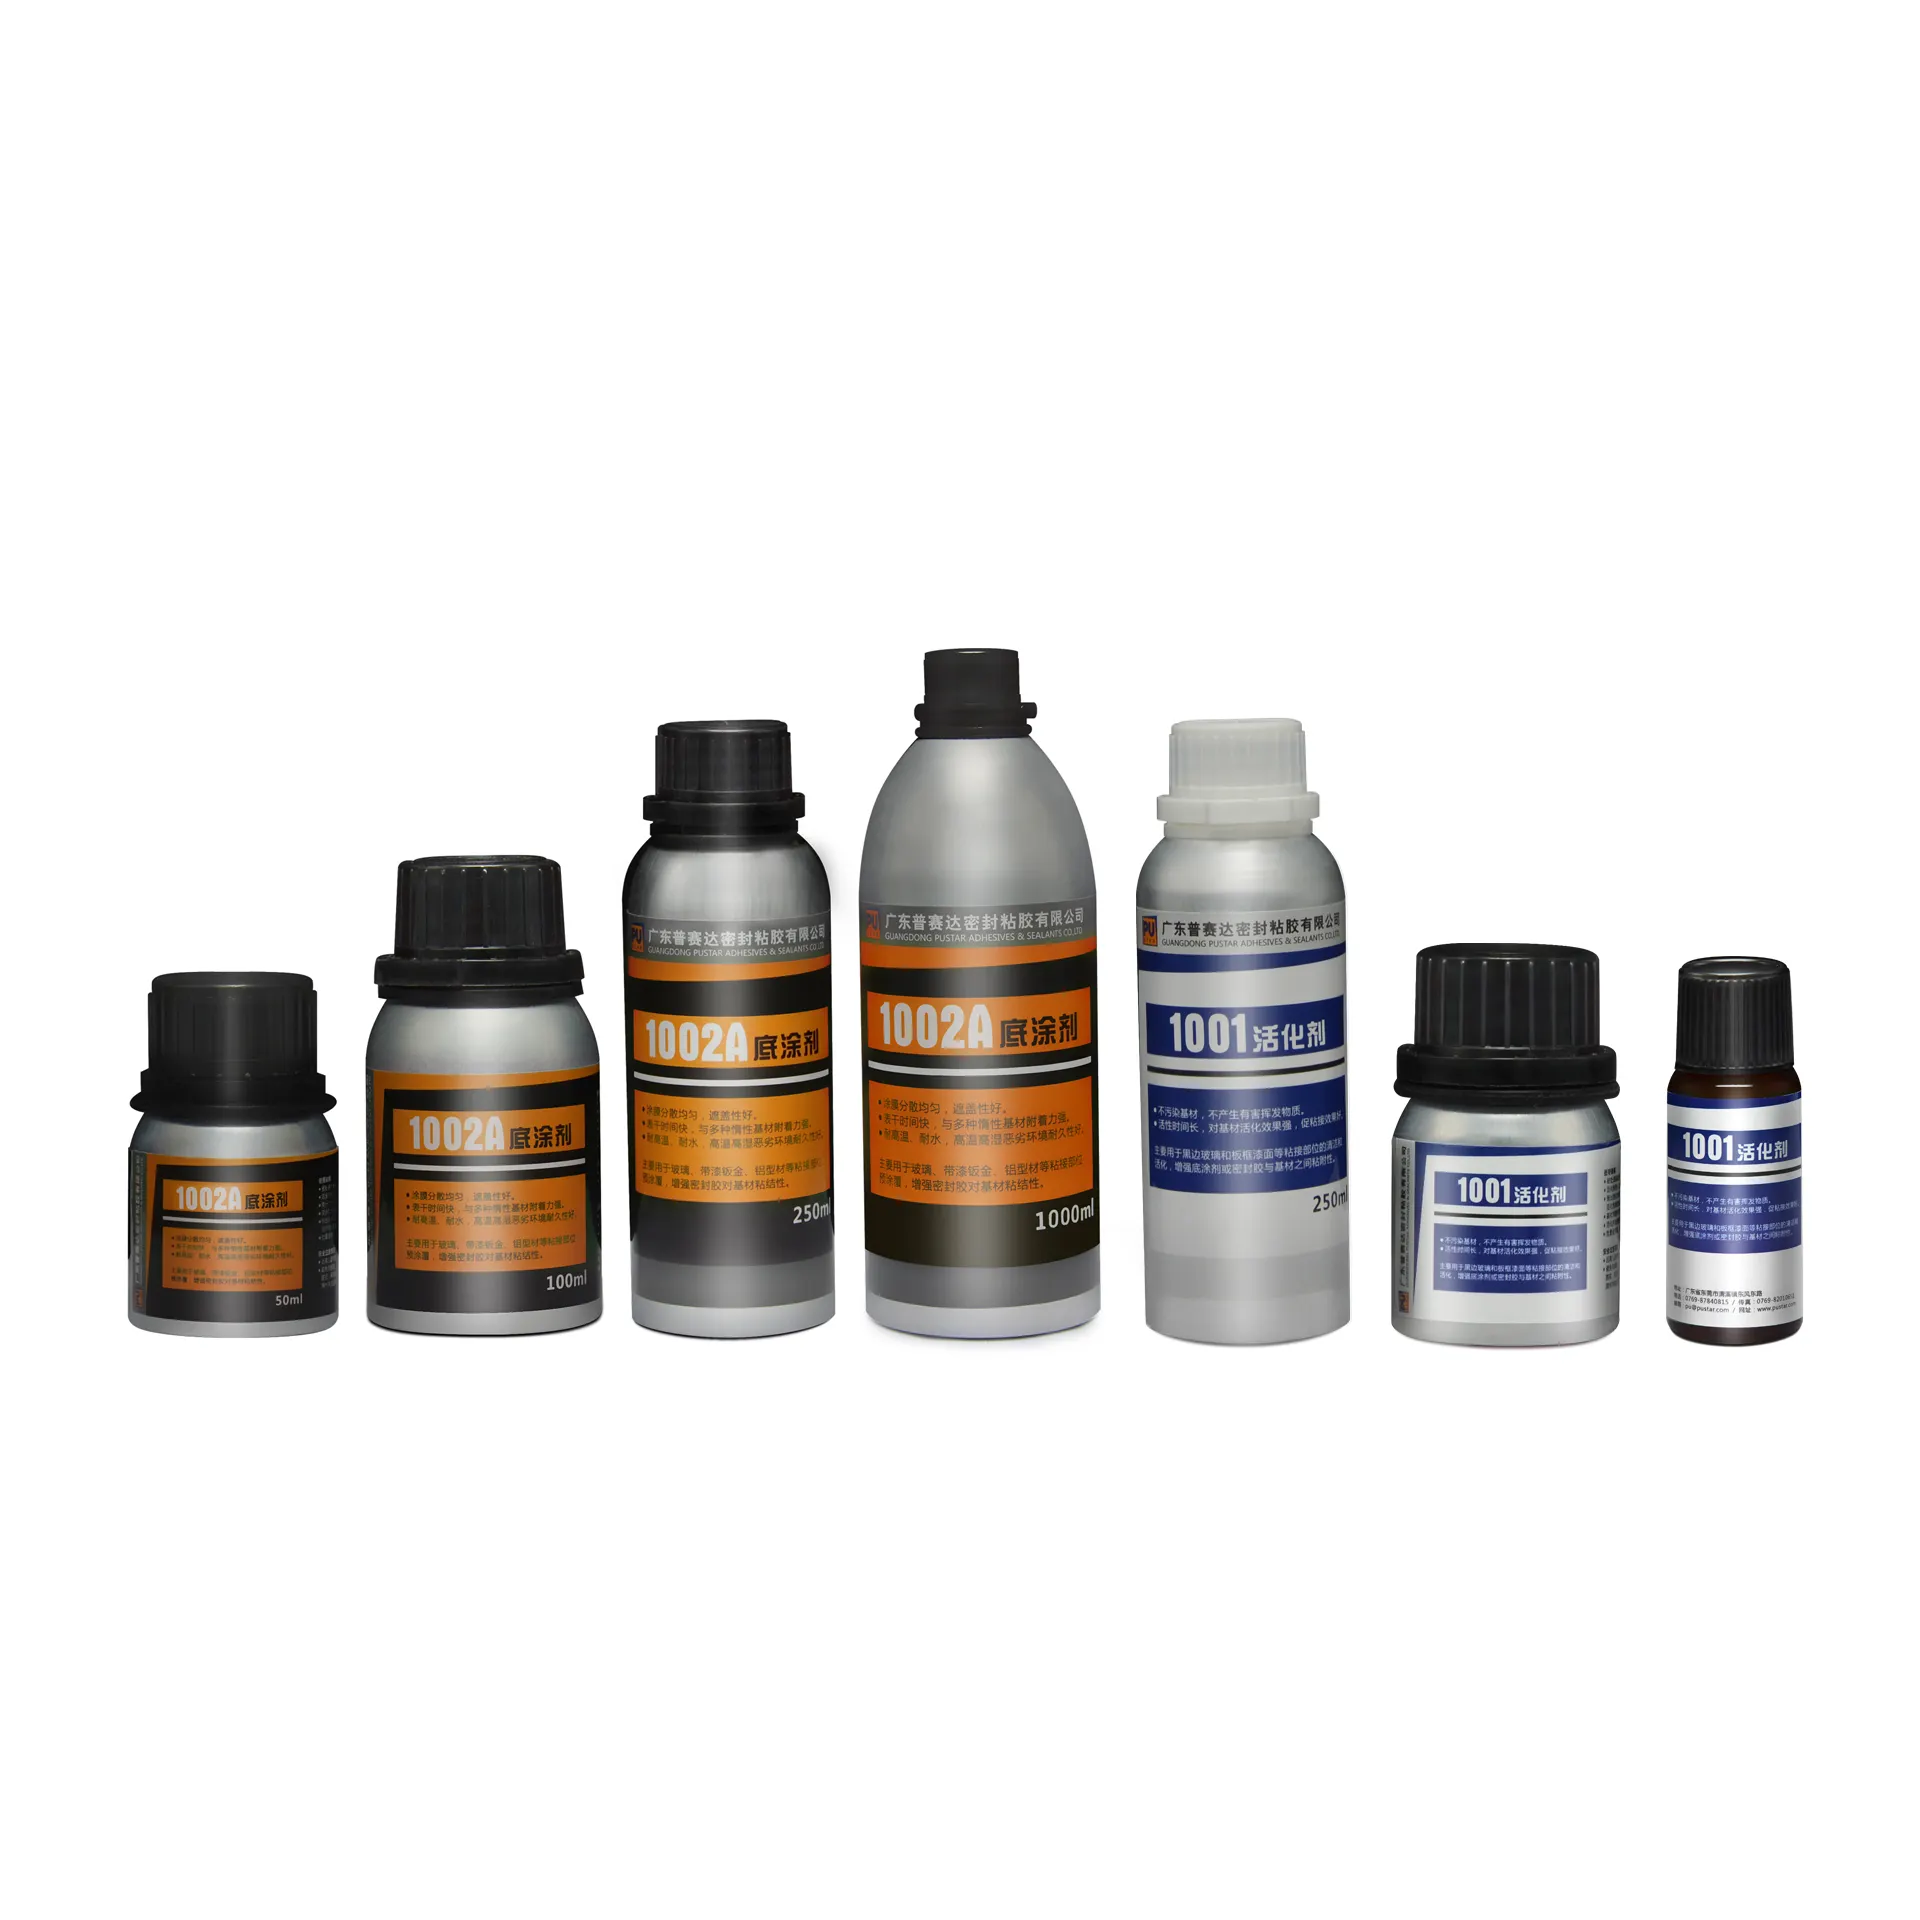 Automotive Primer Activator Improve Curing and Adhesion bonding